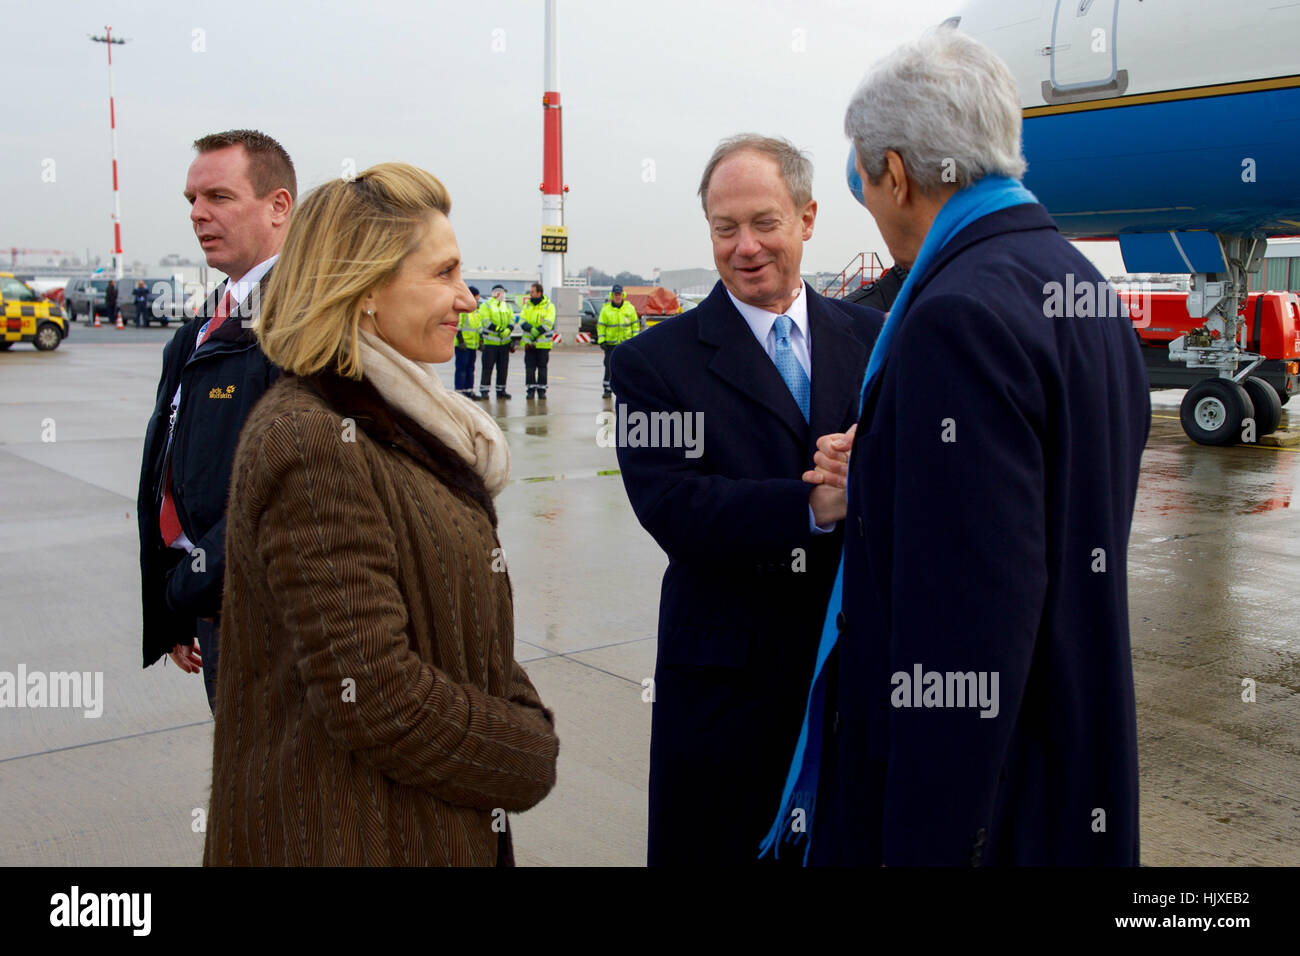 U.S. Secretary of State John Kerry speaks with U.S. Ambassador to Germany John Emerson and his wife, Kimberly, on December 7, 2016, as he arrives in Hamburg, Germany, to attend a meeting of the Organization for Security and Co-operation in Europe. Stock Photo